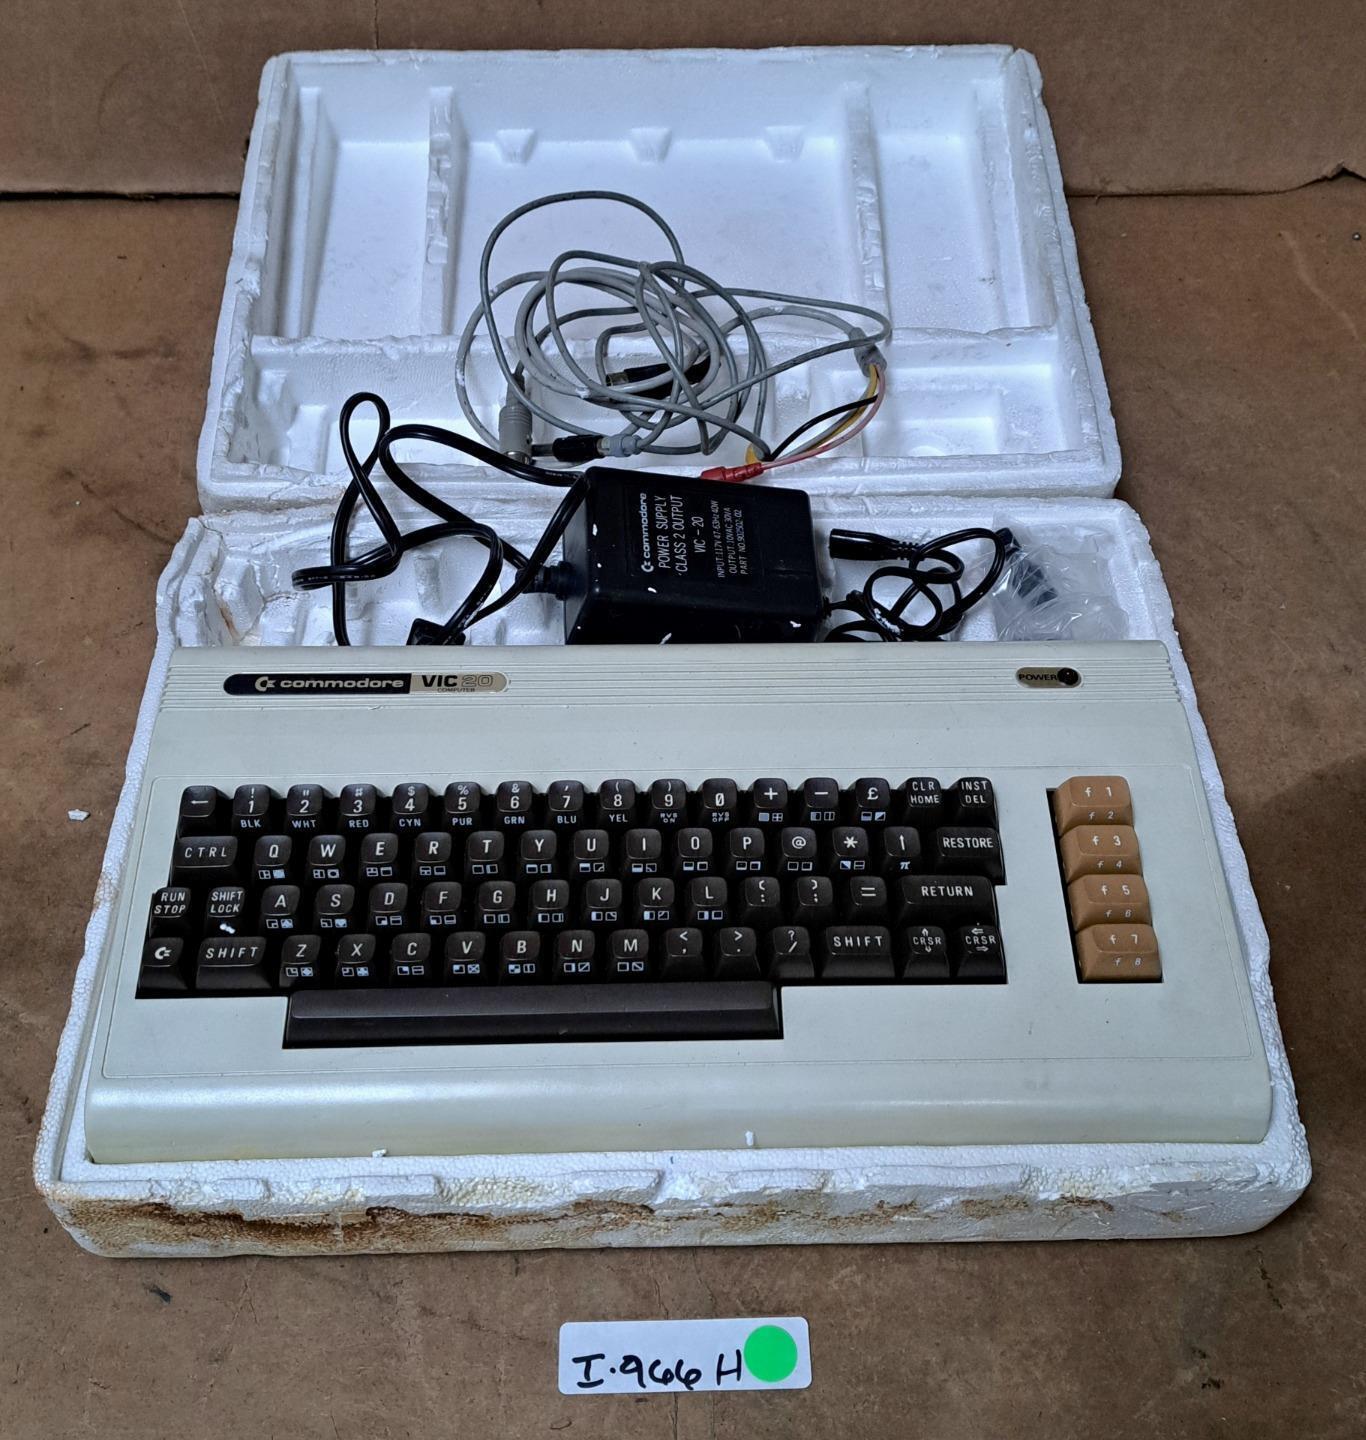 COMMODORE VIC 20 COMPUTER SYSTEM WITH POWER SUPPLY    F